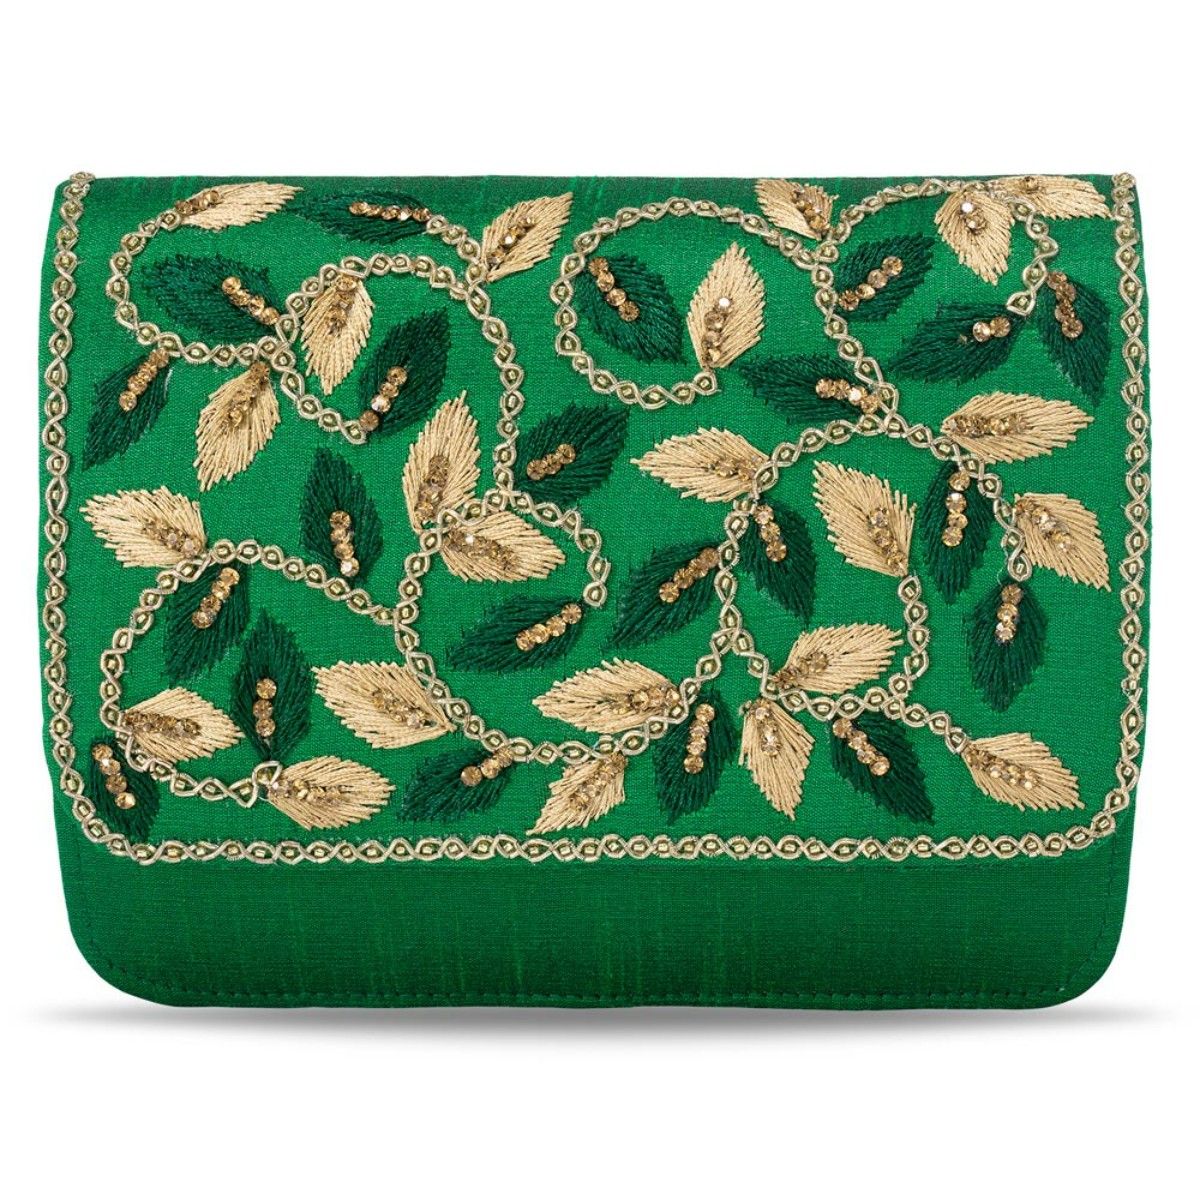 Radha's Indian Embroidered Green Potli Bag with Pearls Handle Purse Party  Wear Ethnic Clutch for Women: Handbags: Amazon.com